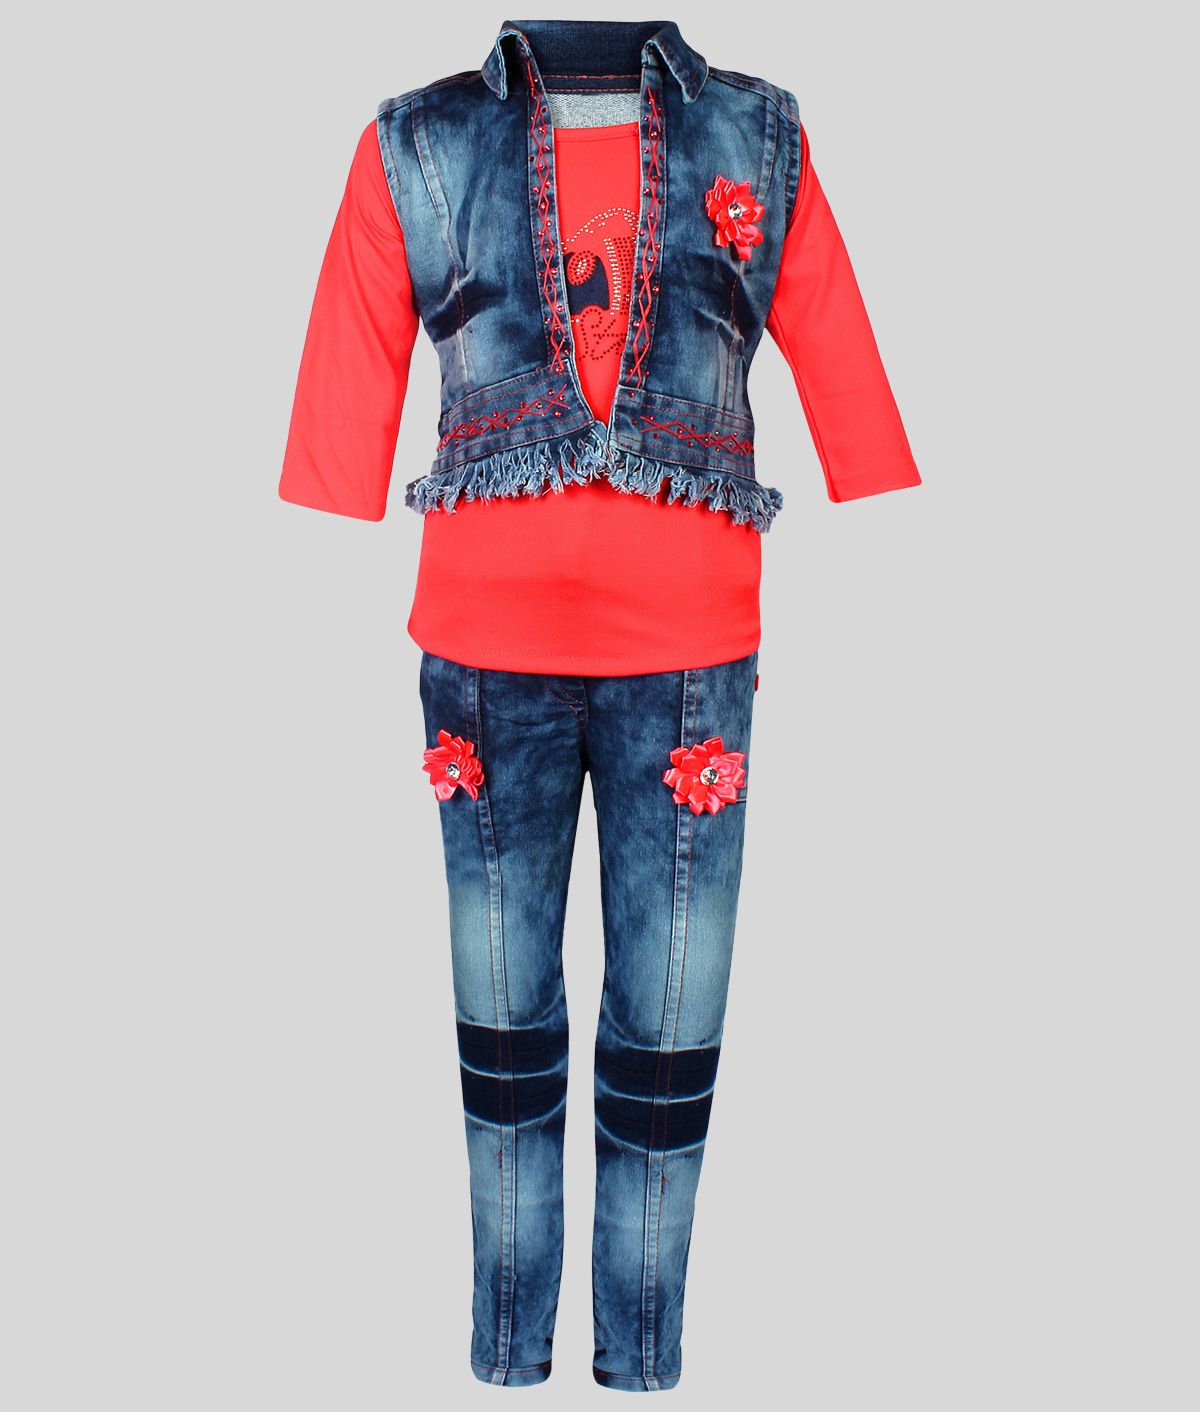     			Arshia Fashions - Red Denim Girl's Top With Jacket With Jeans ( Pack of 1 )